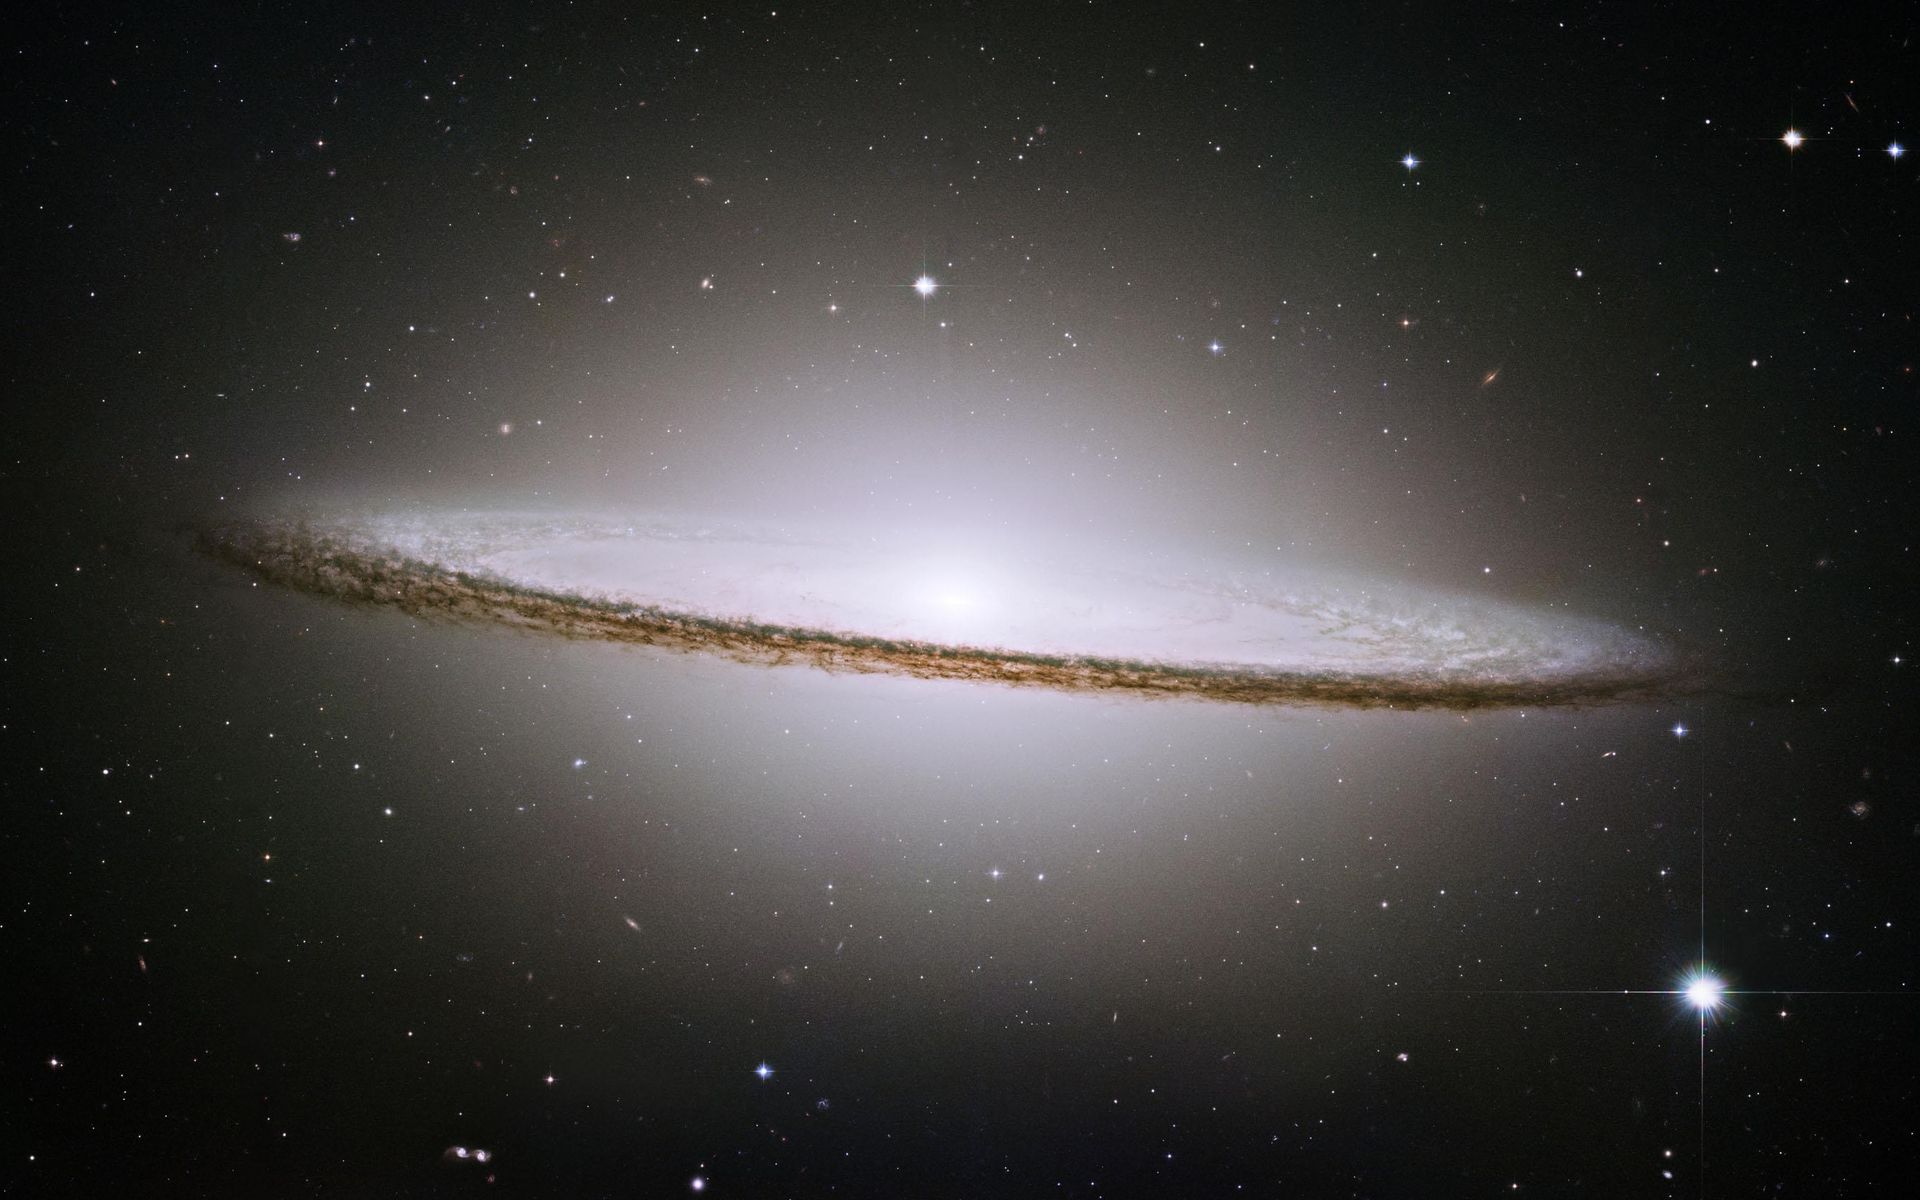 Space Images Hubble Spies Spectacular Sombrero